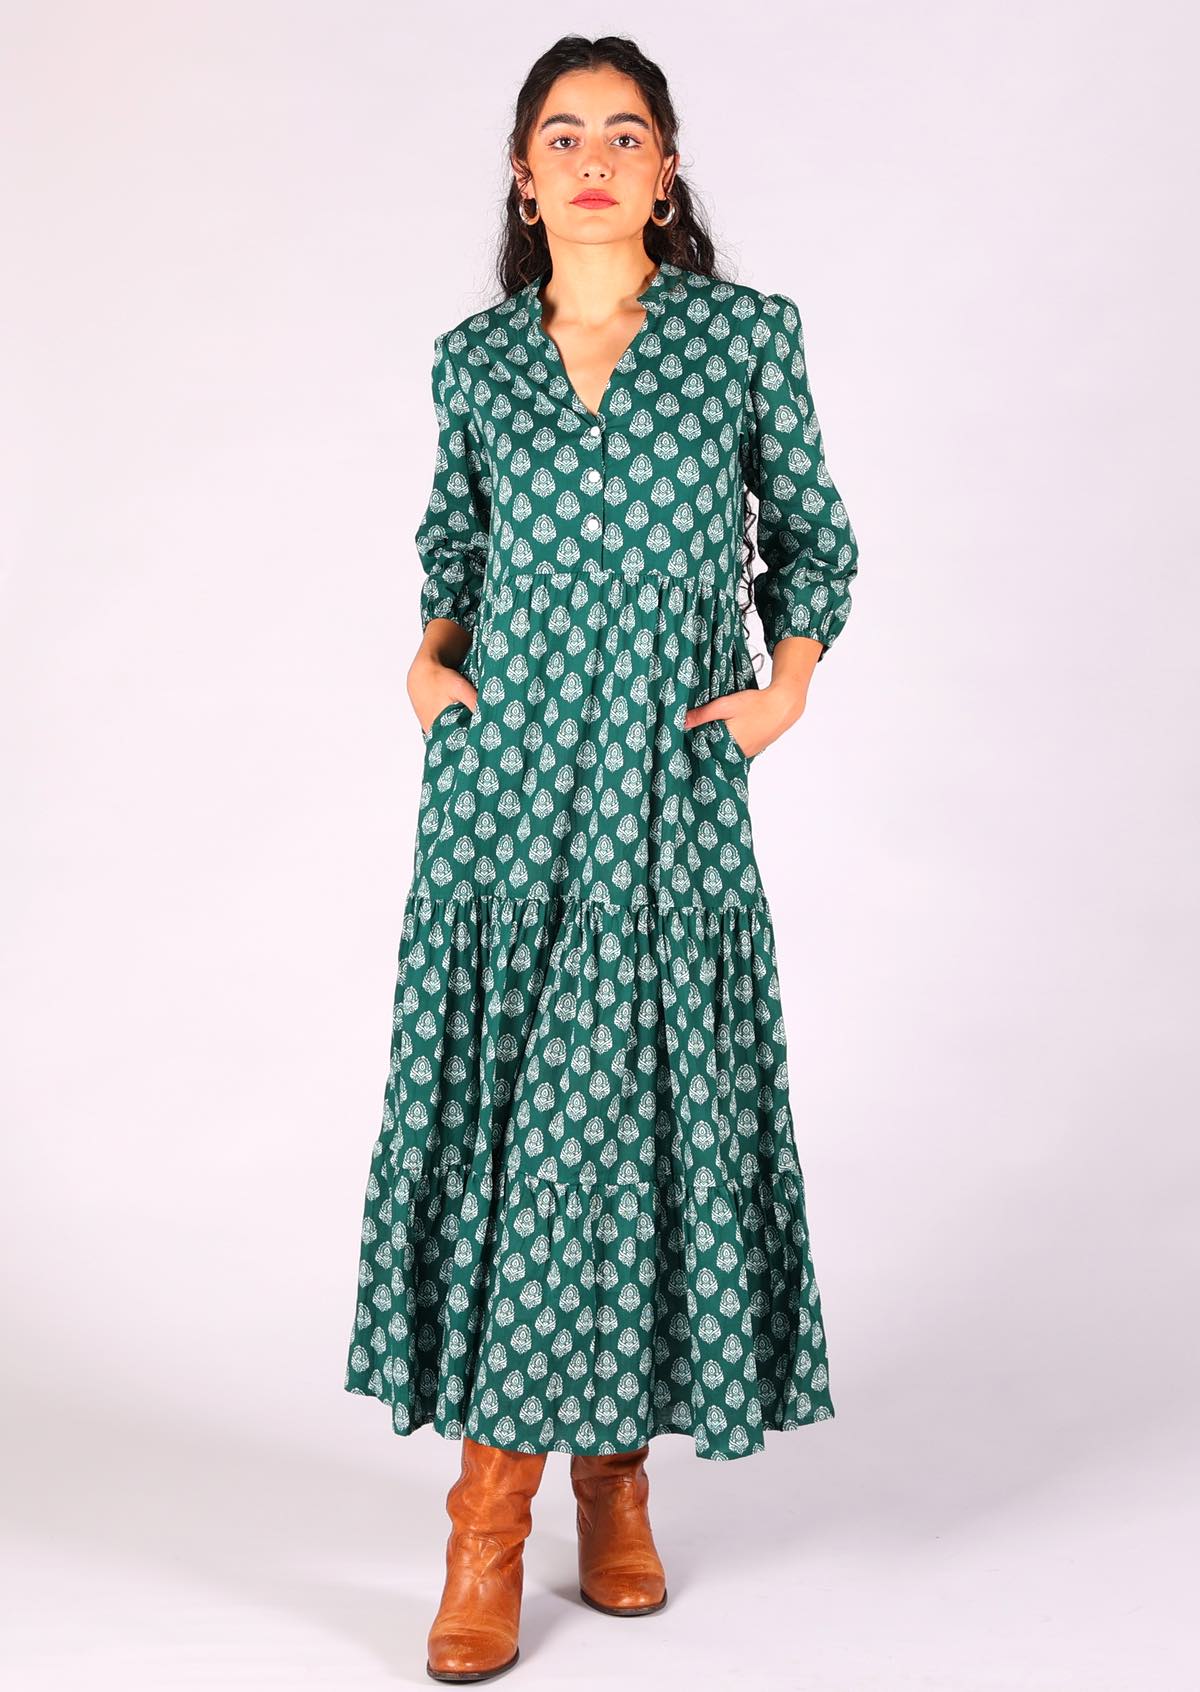 Stunning boho tiered maxi dress in gorgeous green with white pendant print